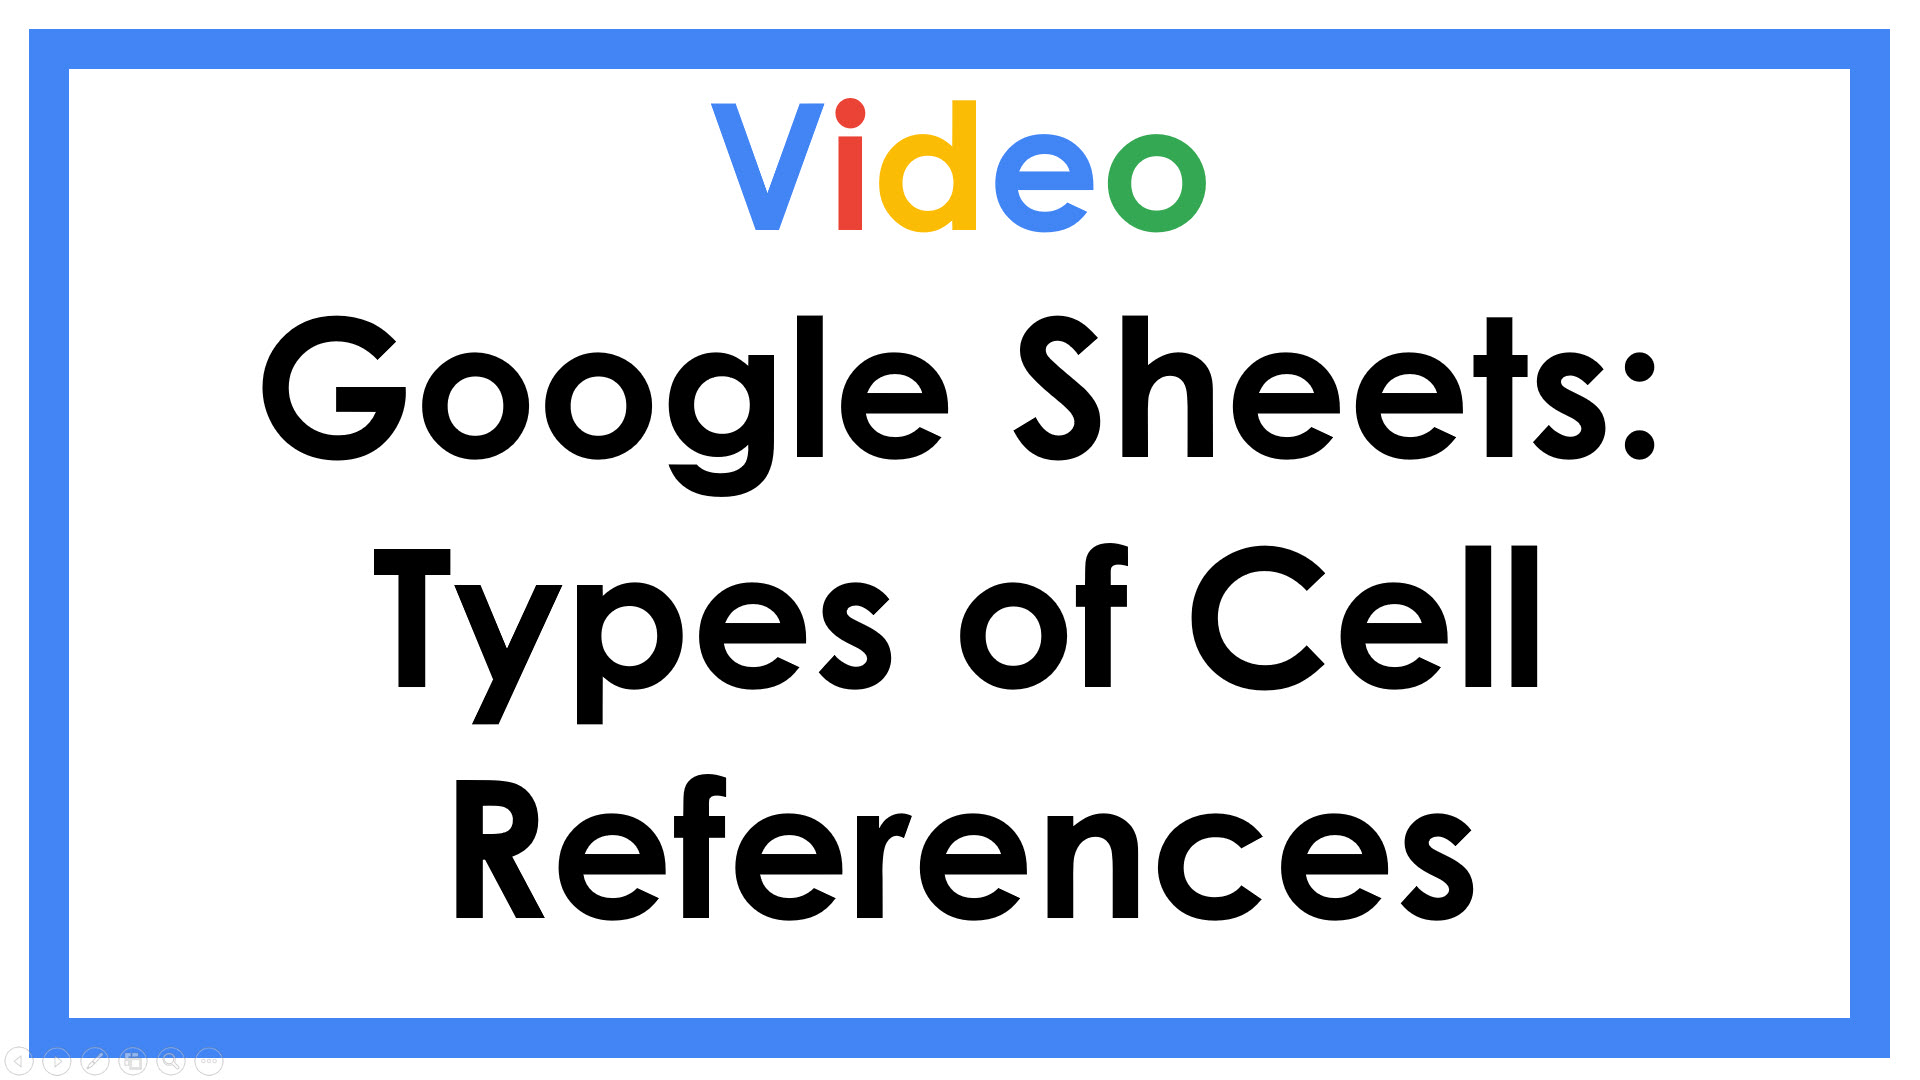 Google Sheets: Types of Cell References